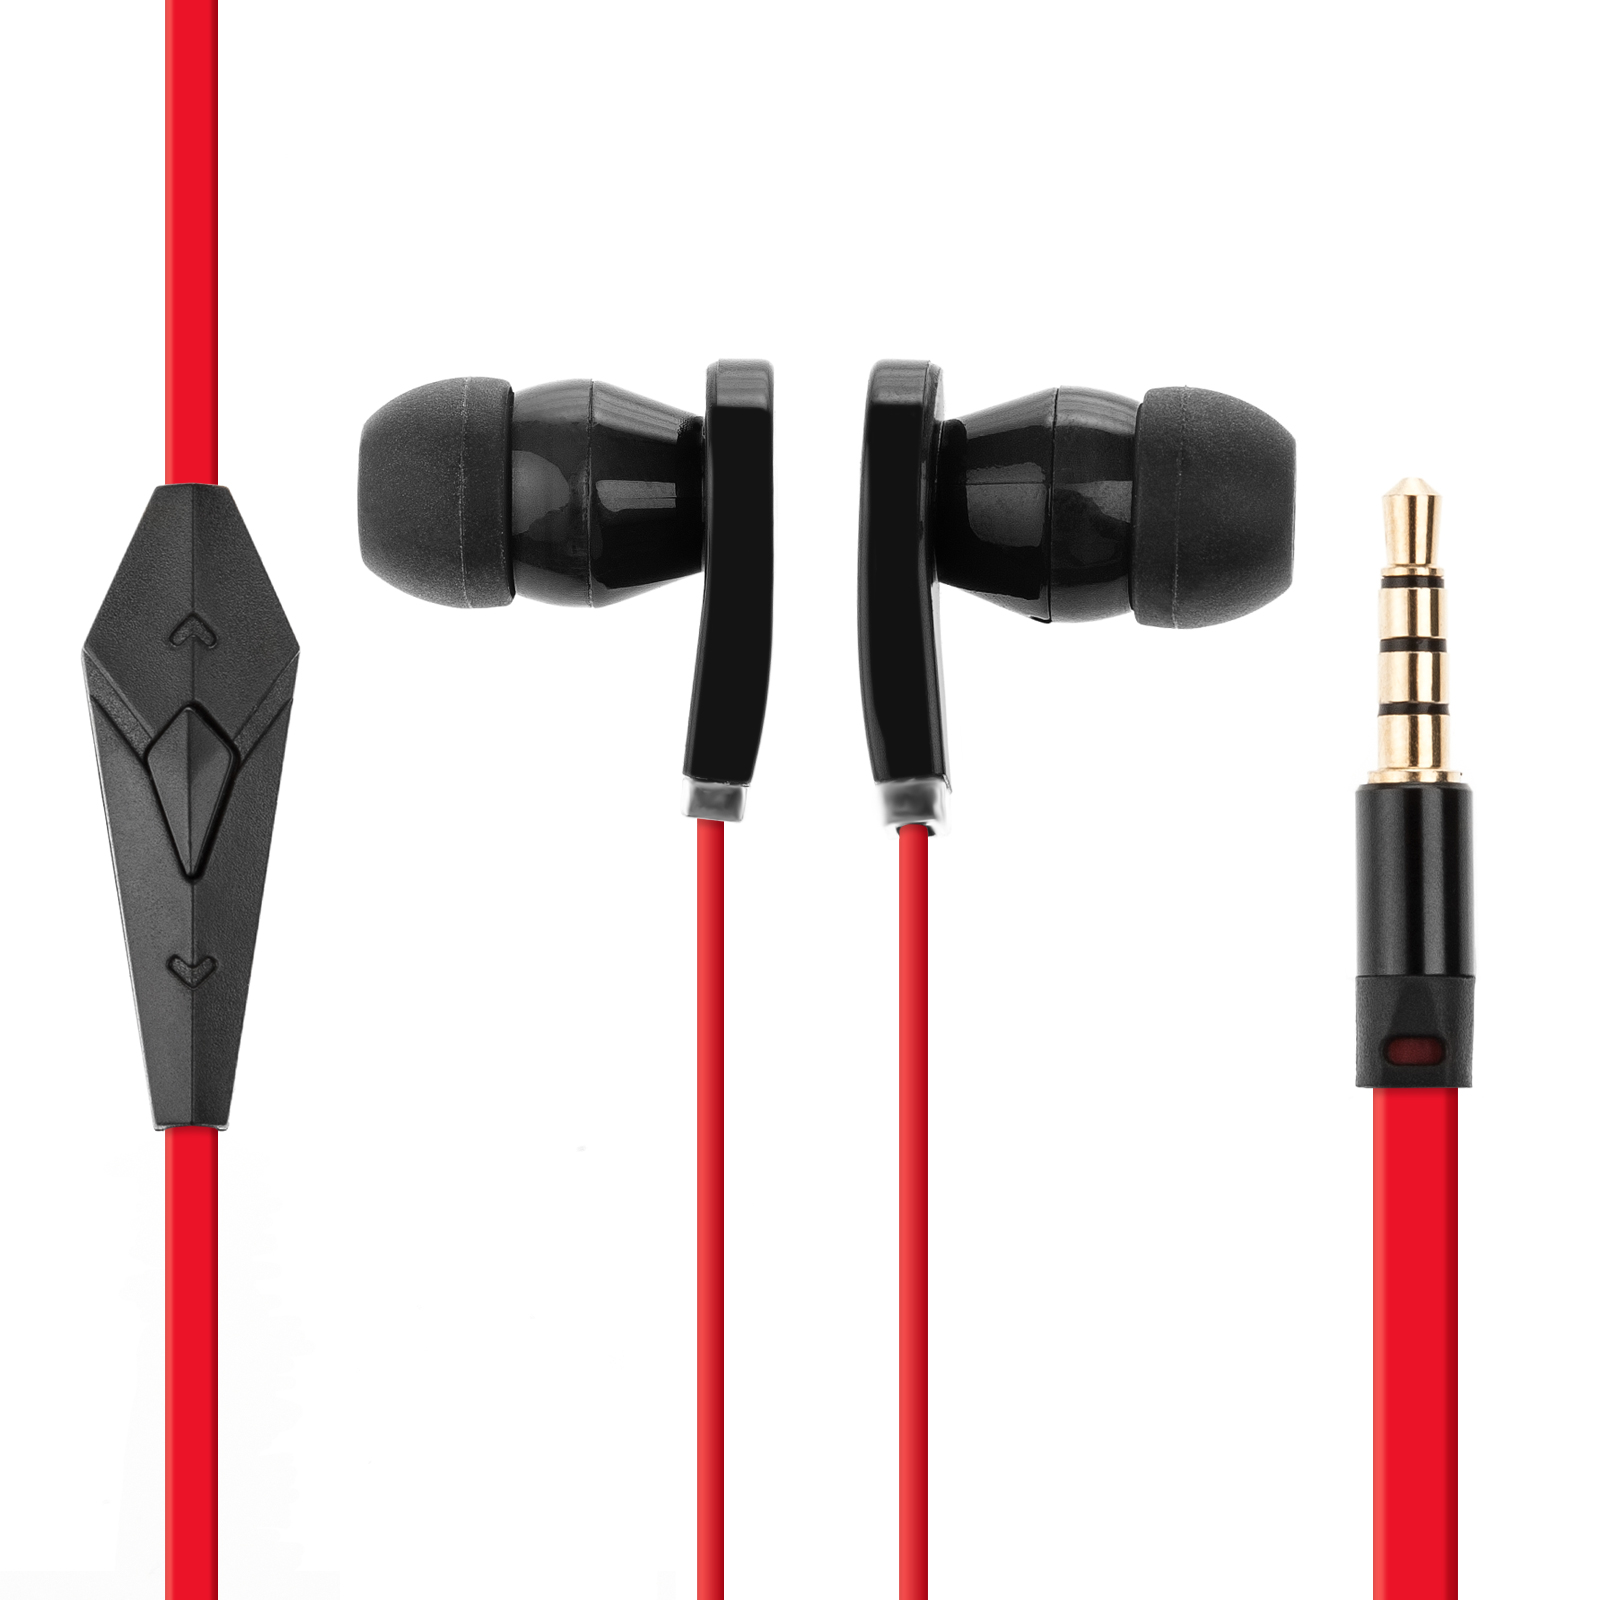 Audiance B1 Ear-Buds - Red Cable